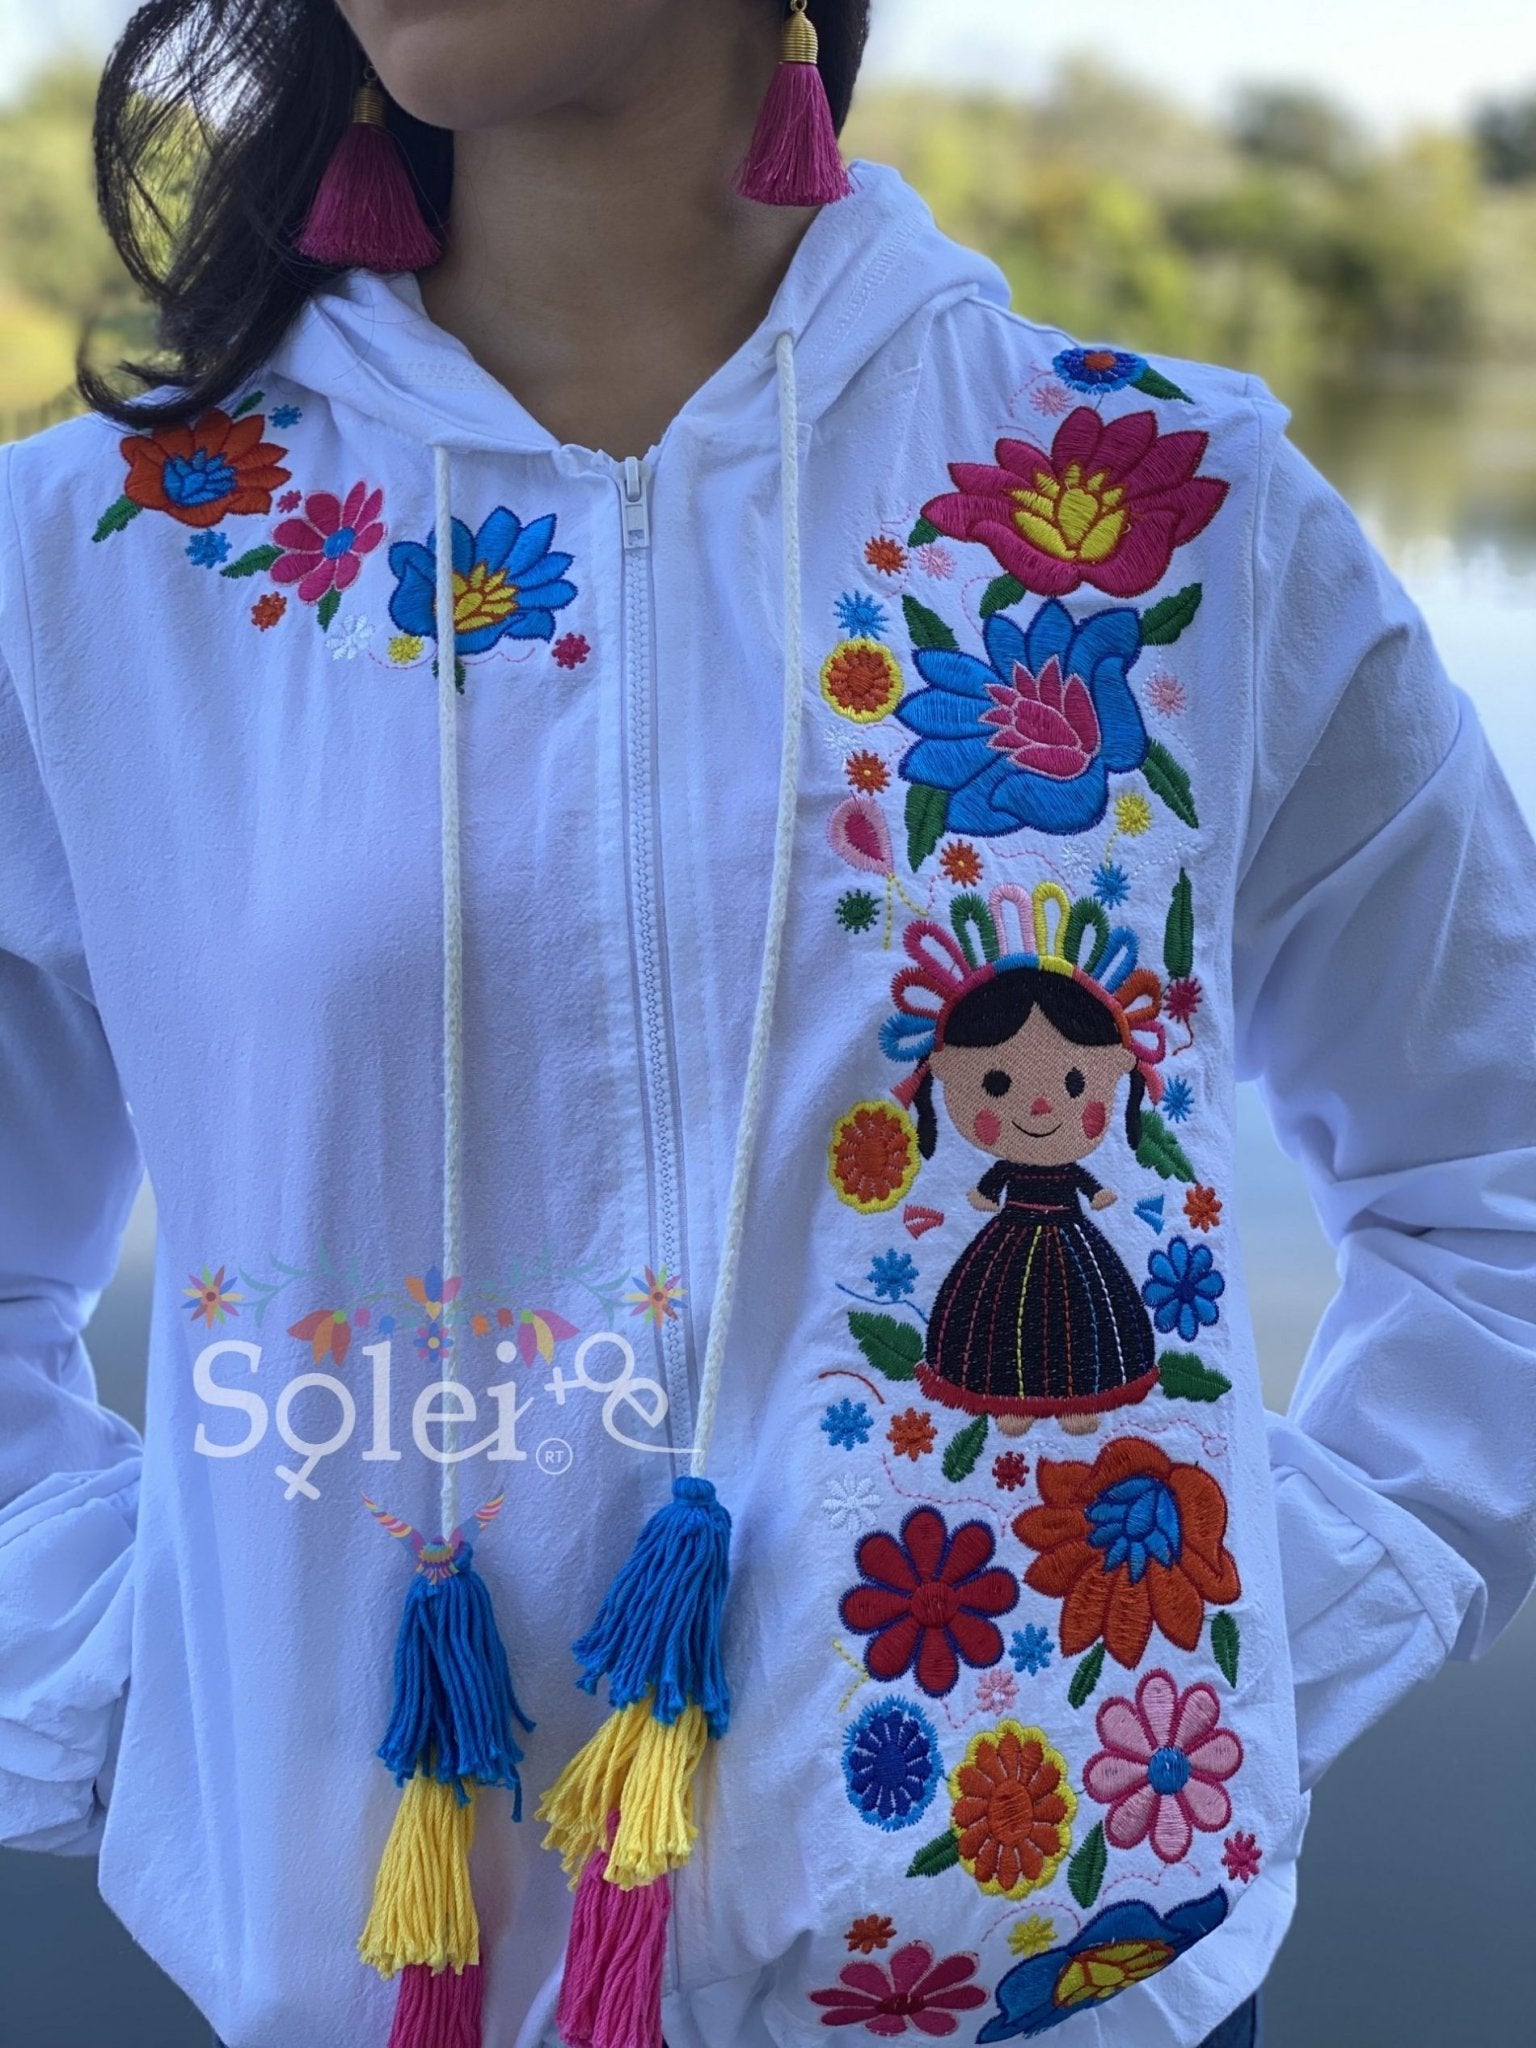 Lele Windbreaker jacket floral & Lele Doll Mexican design embroidered - Solei Store